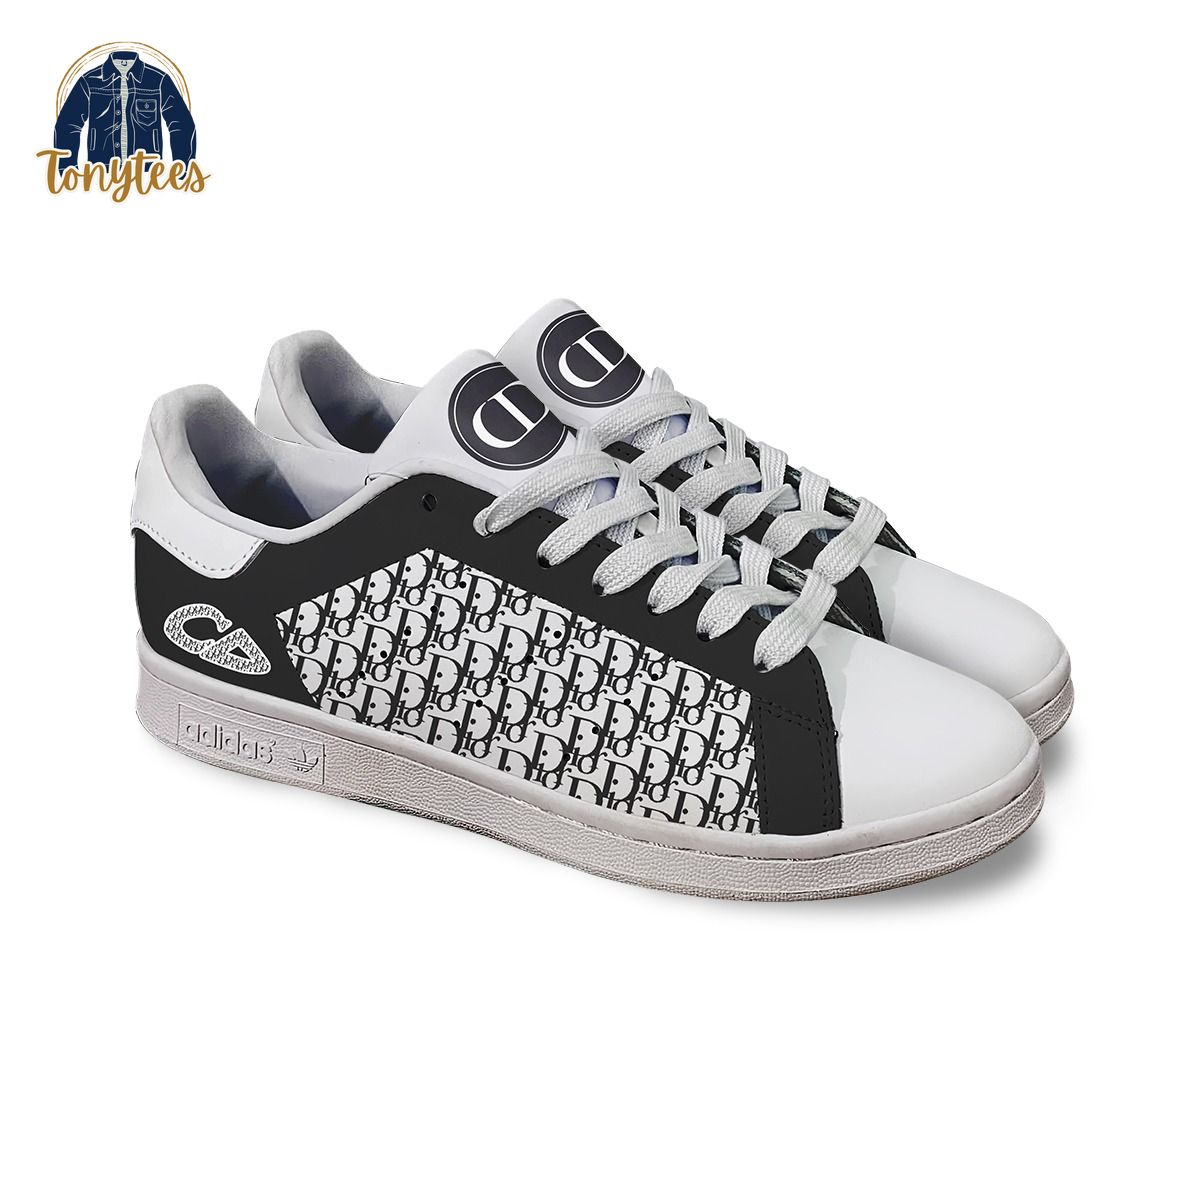 Dior Adidas Stan Smith Sneaker Luxury Brand Shoes